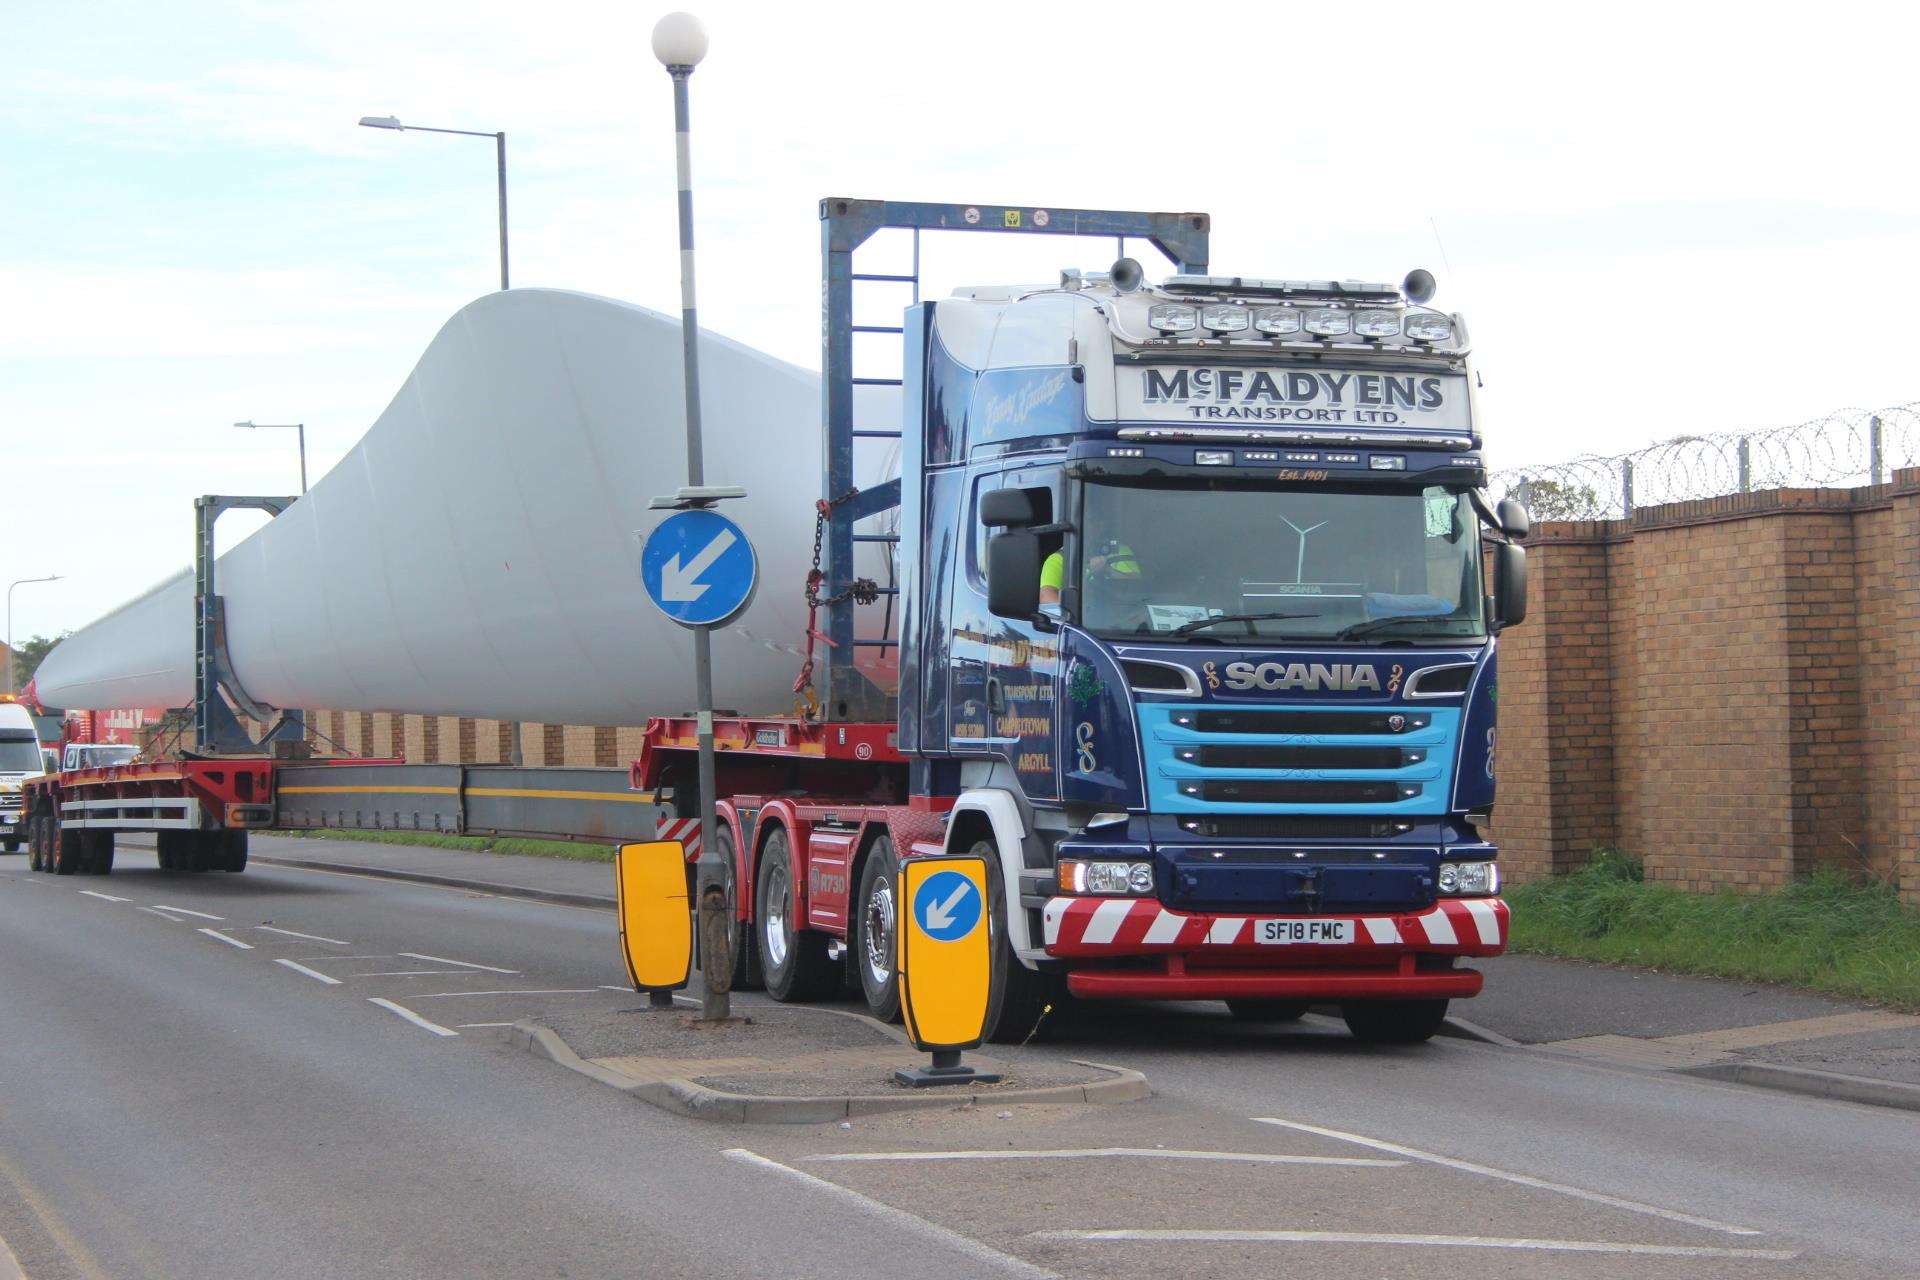 Turbine blade on its way to New Rides Farm, Eastchurch on the Isle of Sheppey from Sheerness Docks (4761108)